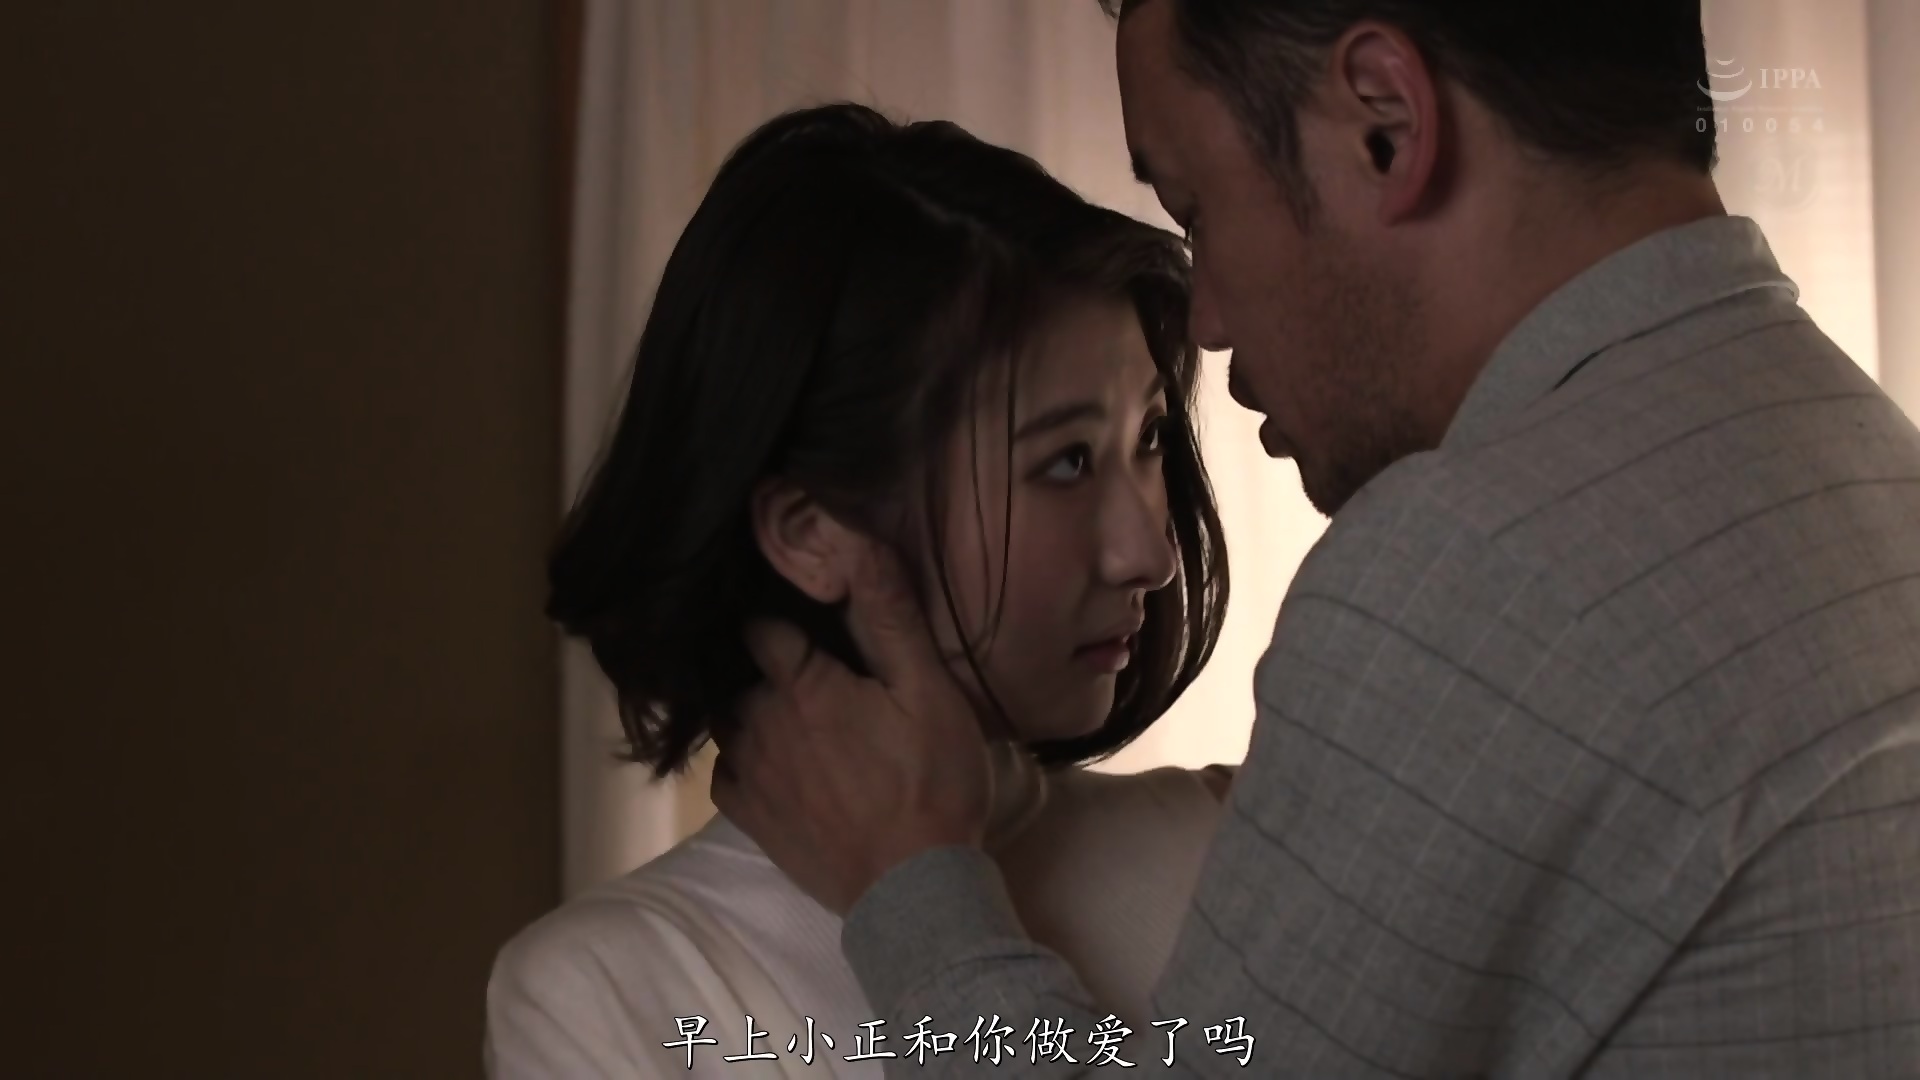 949 (ChiSubs) Cheating With Her Father In Law - Jun Suehiro pic